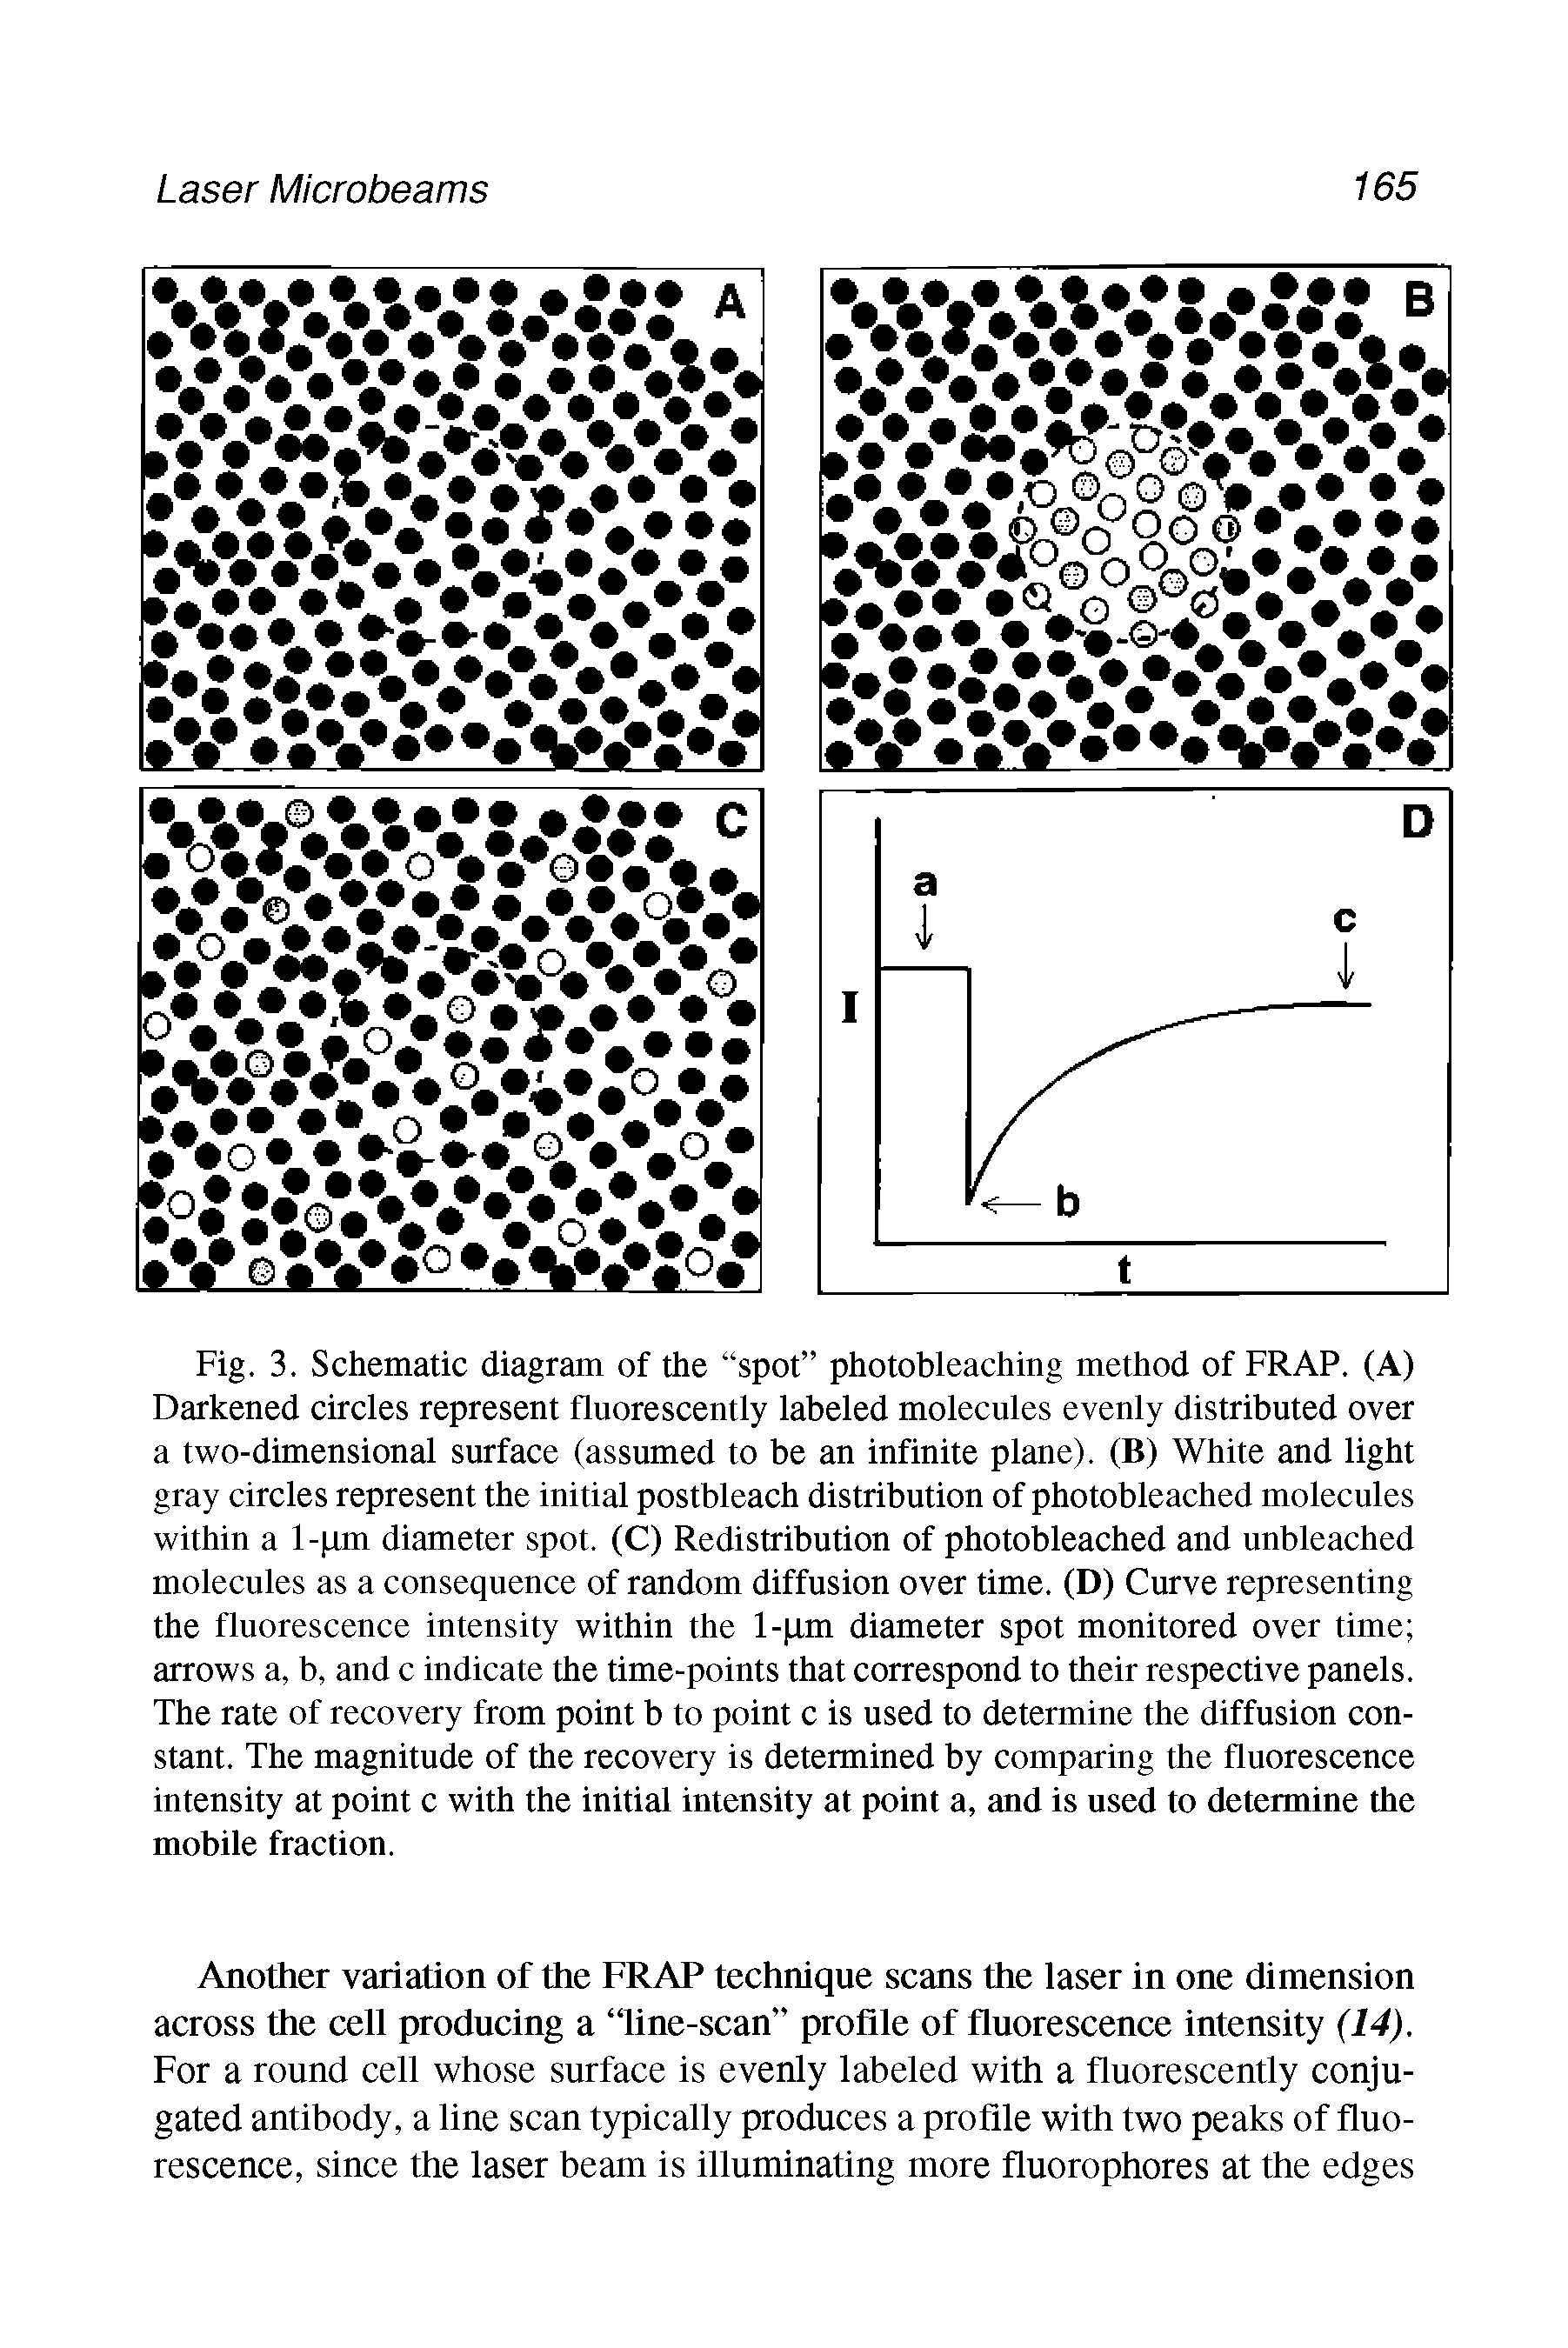 Fig. 3. Schematic diagram of the spot photobleaching method of FRAP. (A) Darkened circles represent fluorescently labeled molecules evenly distributed over a two-dimensional surface (assumed to be an infinite plane). (B) White and light gray circles represent the initial postbleach distribution of photobleached molecules within a 1-pm diameter spot. (C) Redistribution of photobleached and unbleached molecules as a consequence of random diffusion over time. (D) Curve representing the fluorescence intensity within the l-pm diameter spot monitored over time arrows a, b, and c indicate the time-points that correspond to their respective panels. The rate of recovery from point b to point c is used to determine the diffusion constant. The magnitude of the recovery is determined by comparing the fluorescence intensity at point c with the initial intensity at point a, and is used to determine the mobile fraction.